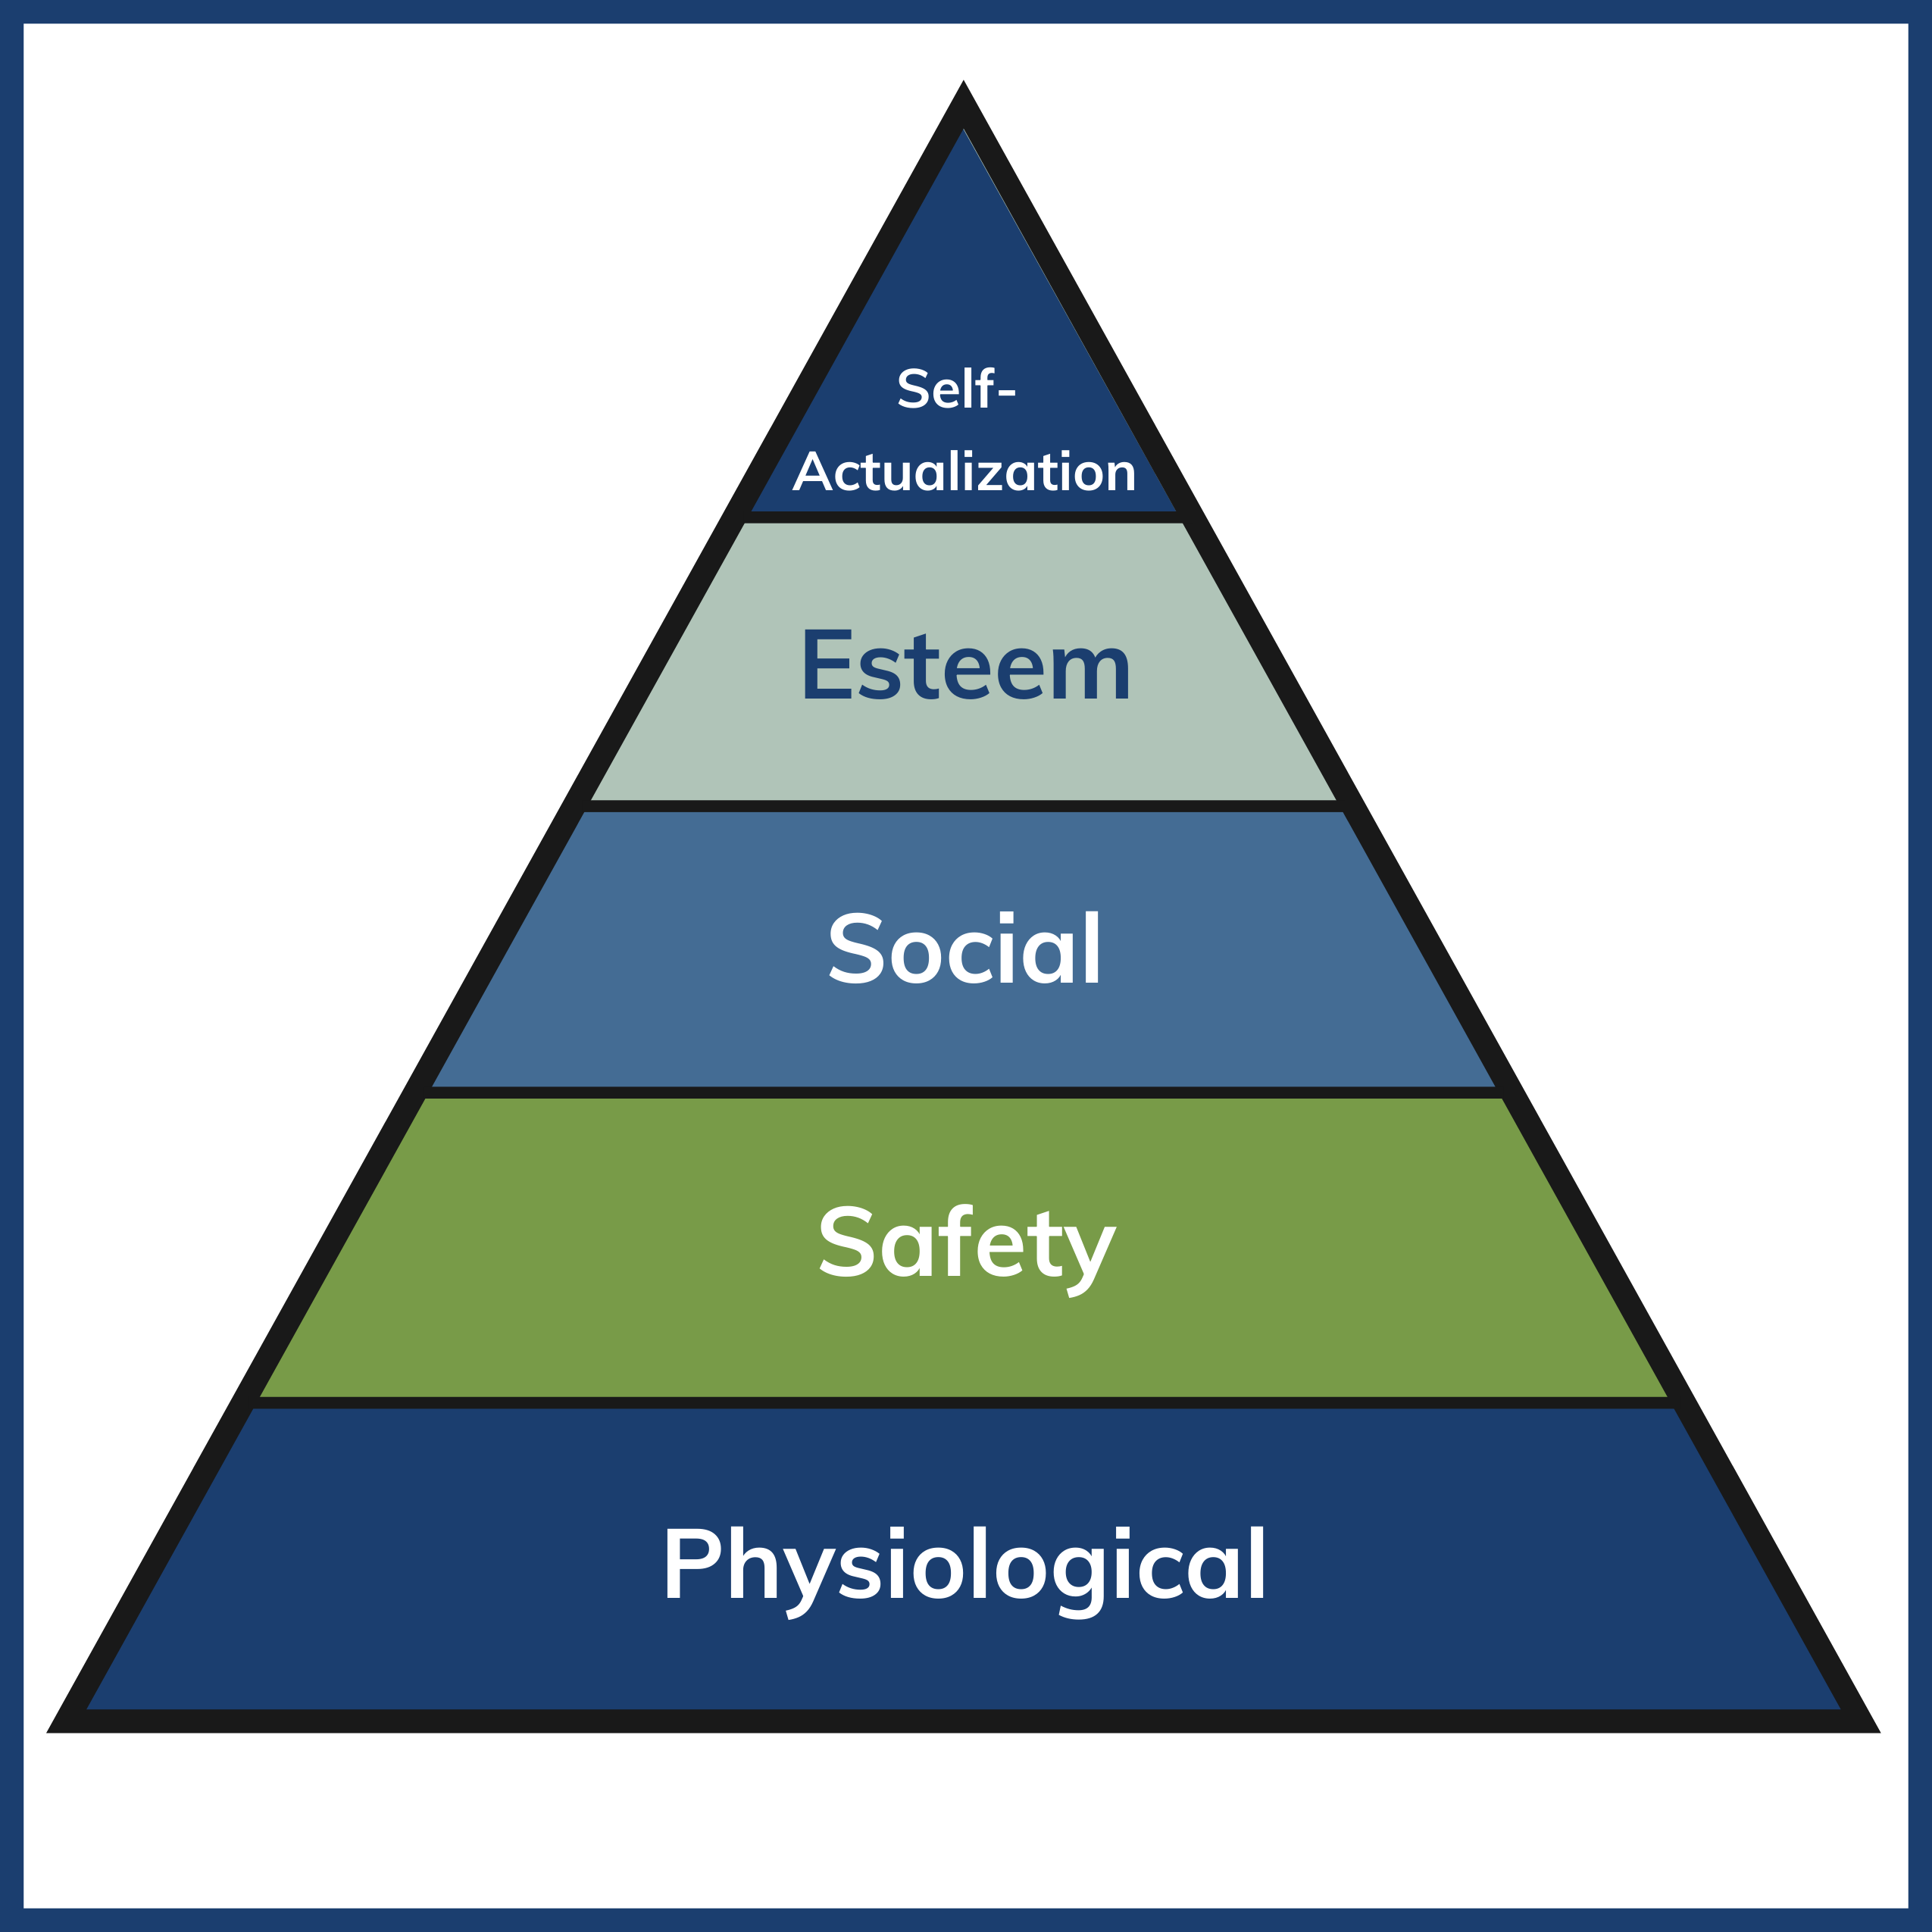 Hierarchy of Human Needs